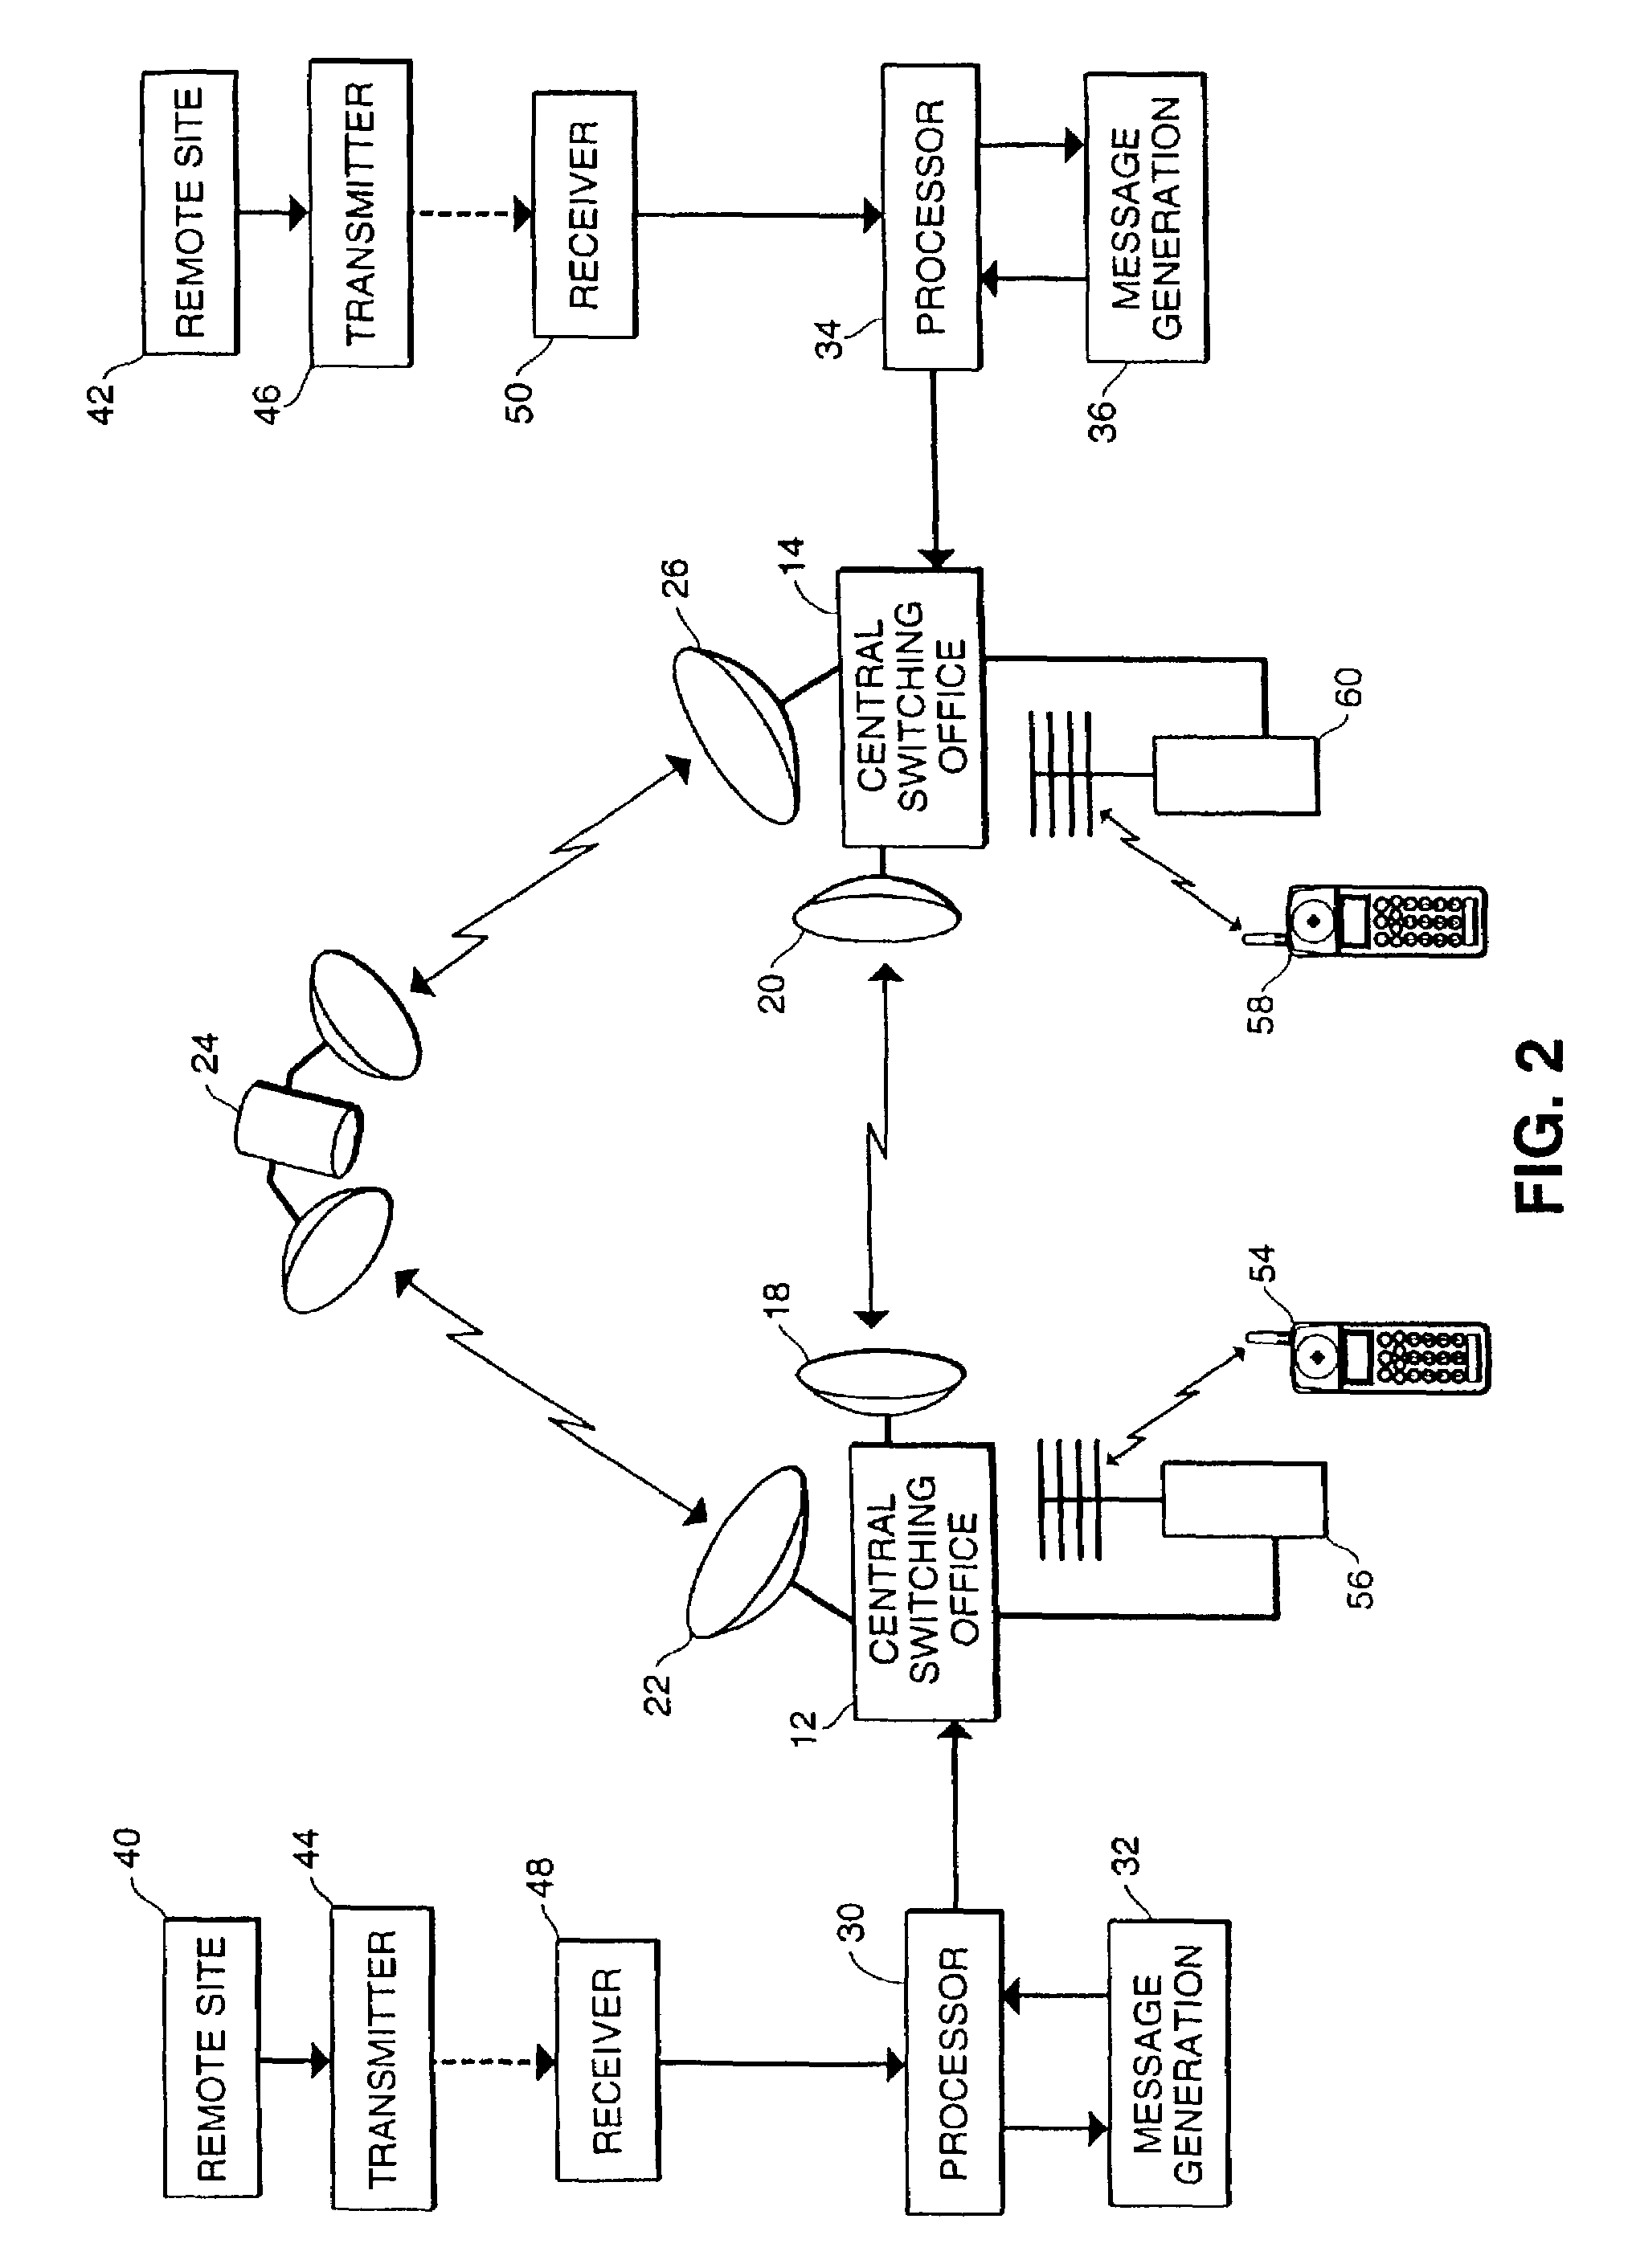 Telecommunication system using message presentation during a ringing signal period